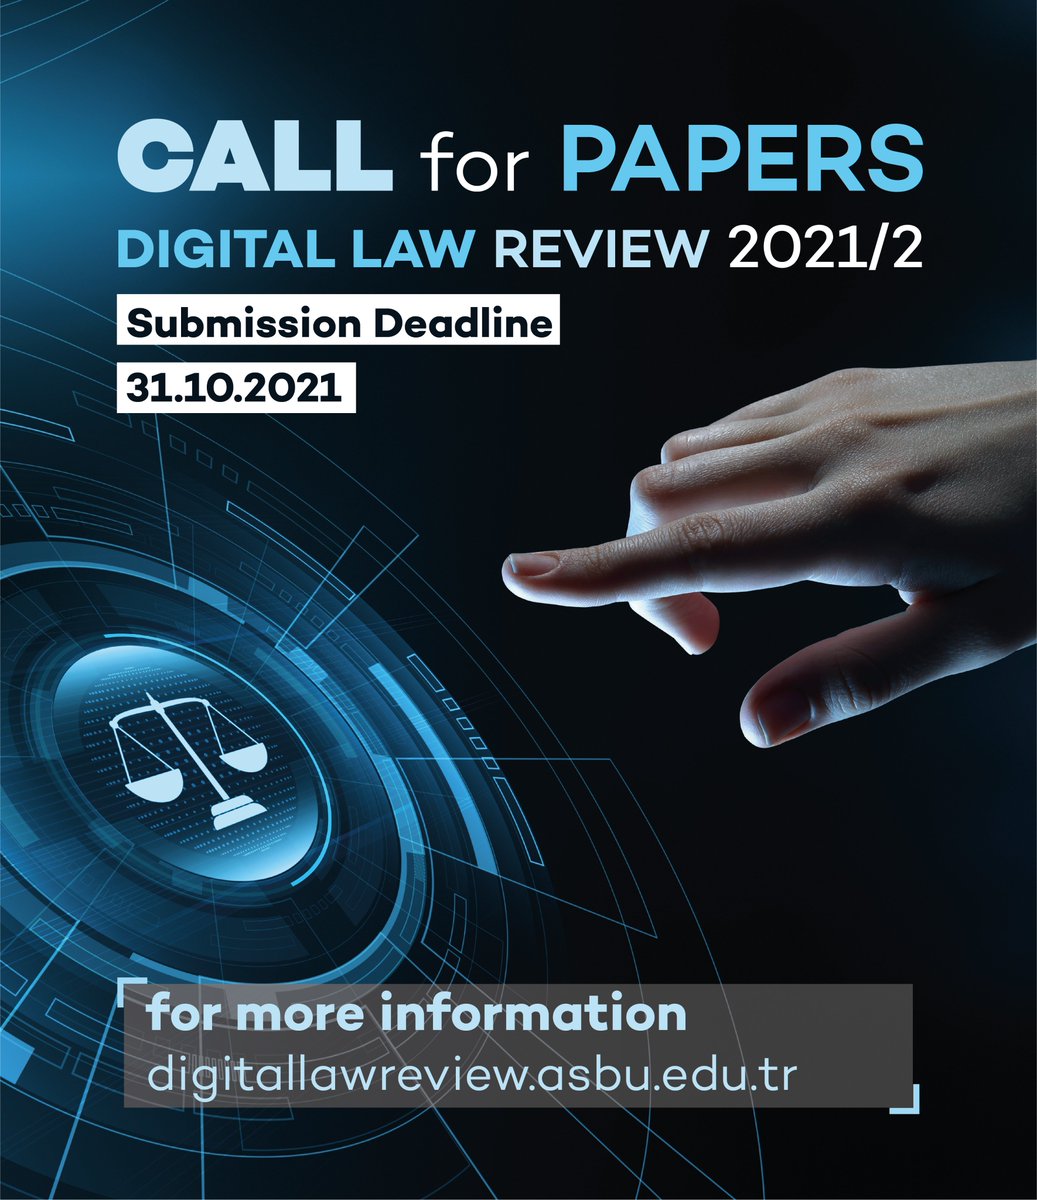 Digital Law Review is now accepting submissions for its 2021/2 issue!

Articles, translations, book reviews and case analyses may be submitted via DergiPark.

Deadline for submissions: 31.10.2021

hf.asbu.edu.tr/en/announcemen…

#DigitalLawReview #ITLaw #callforpapers #ASBU